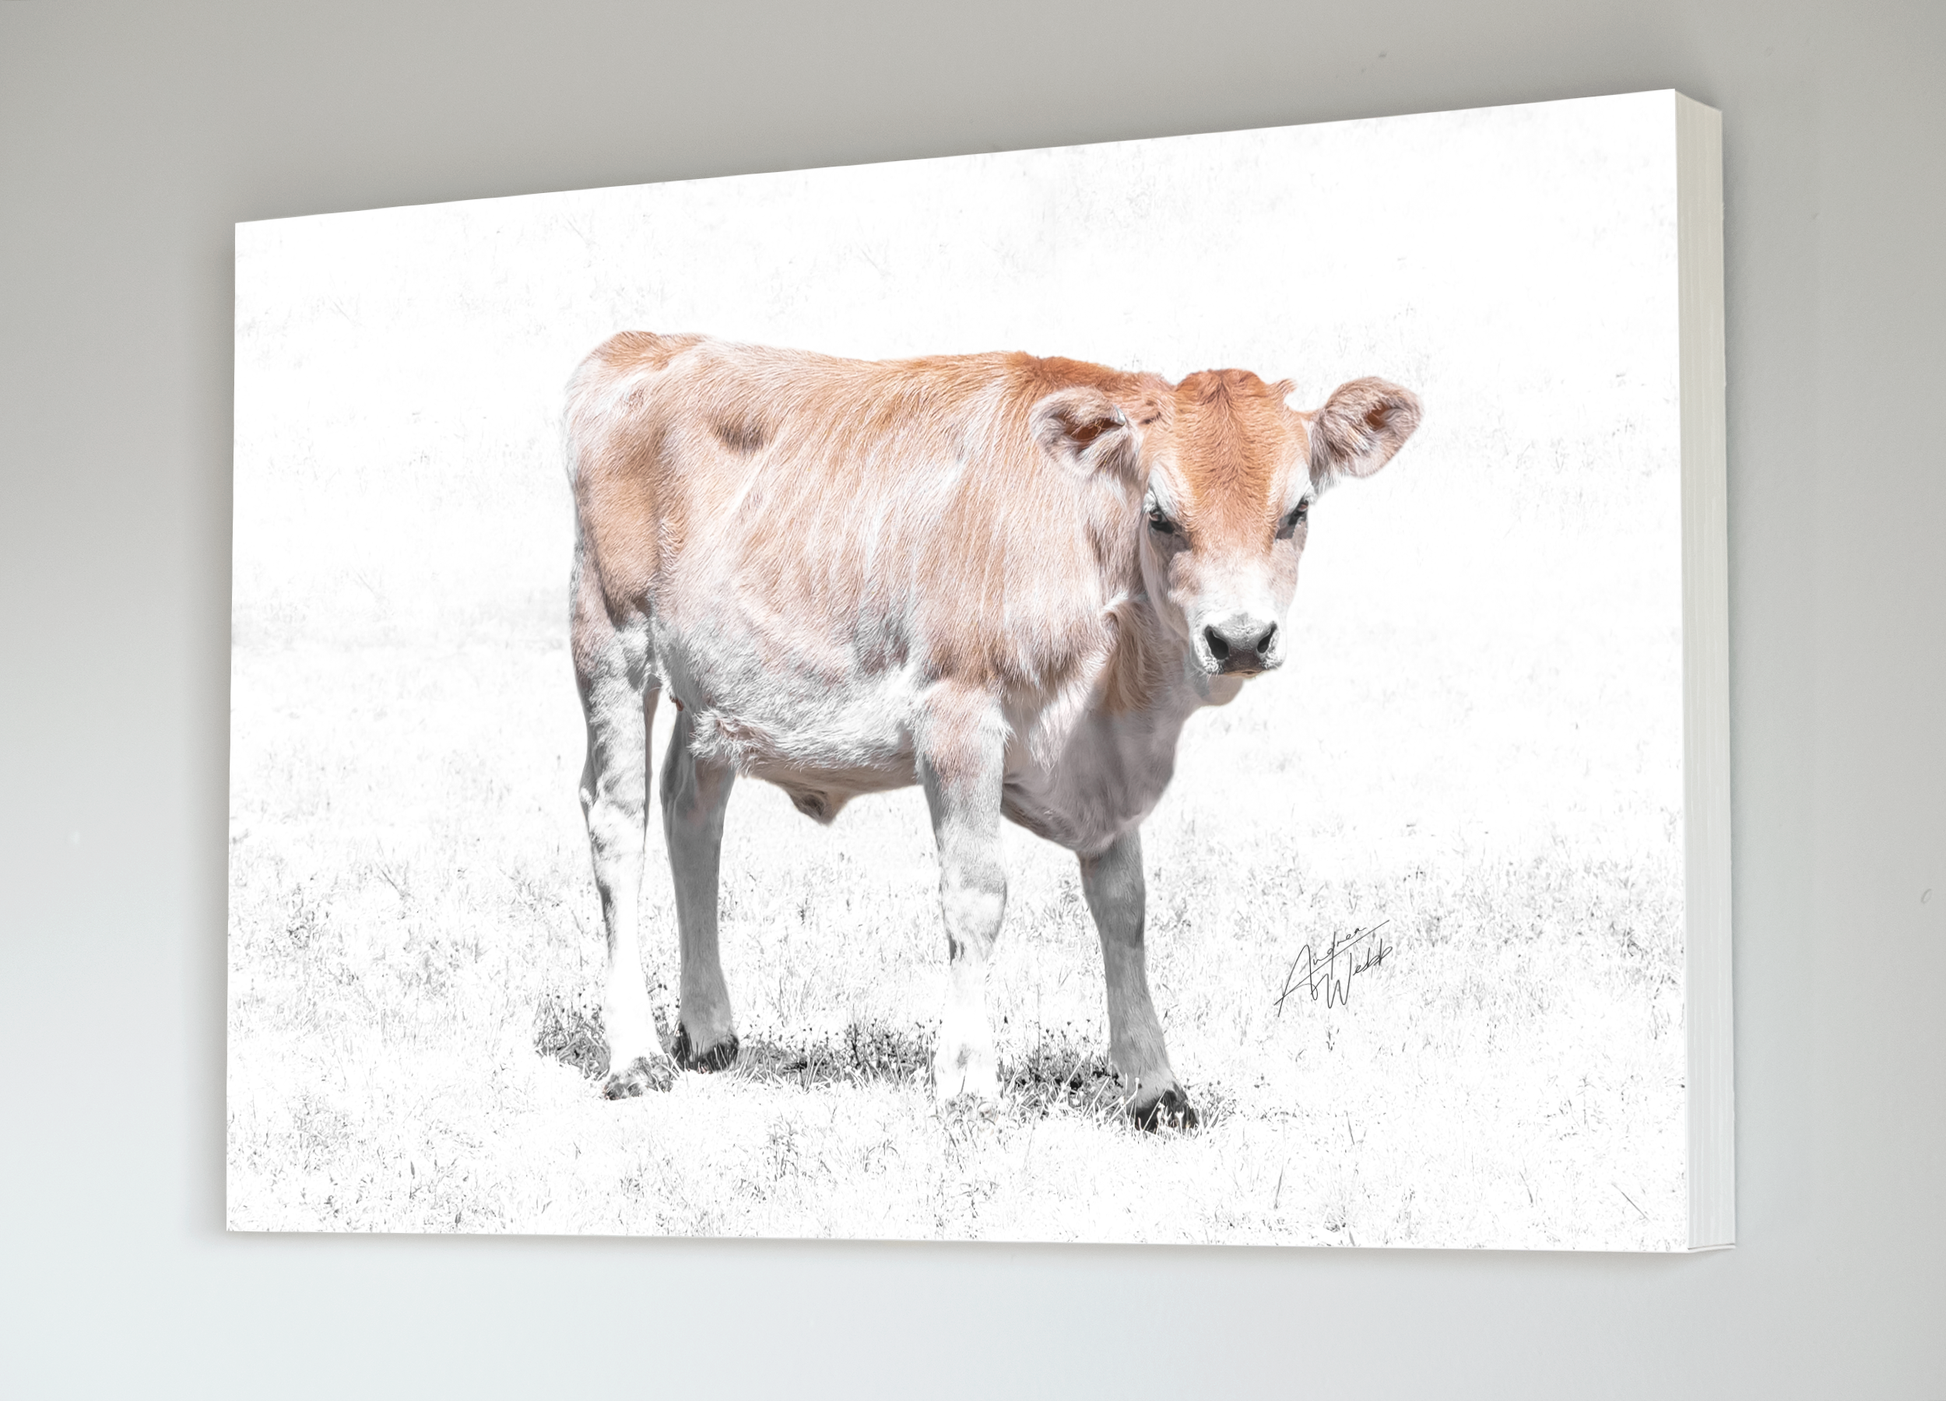 A Jersey Calf Heifer Cow in a White Background Field Fine Art Portrait. Cow art. Cow photography. Cow artwork. Cow wall art. Cow prints. Cow canvases. Cow gifts. Animal photography.